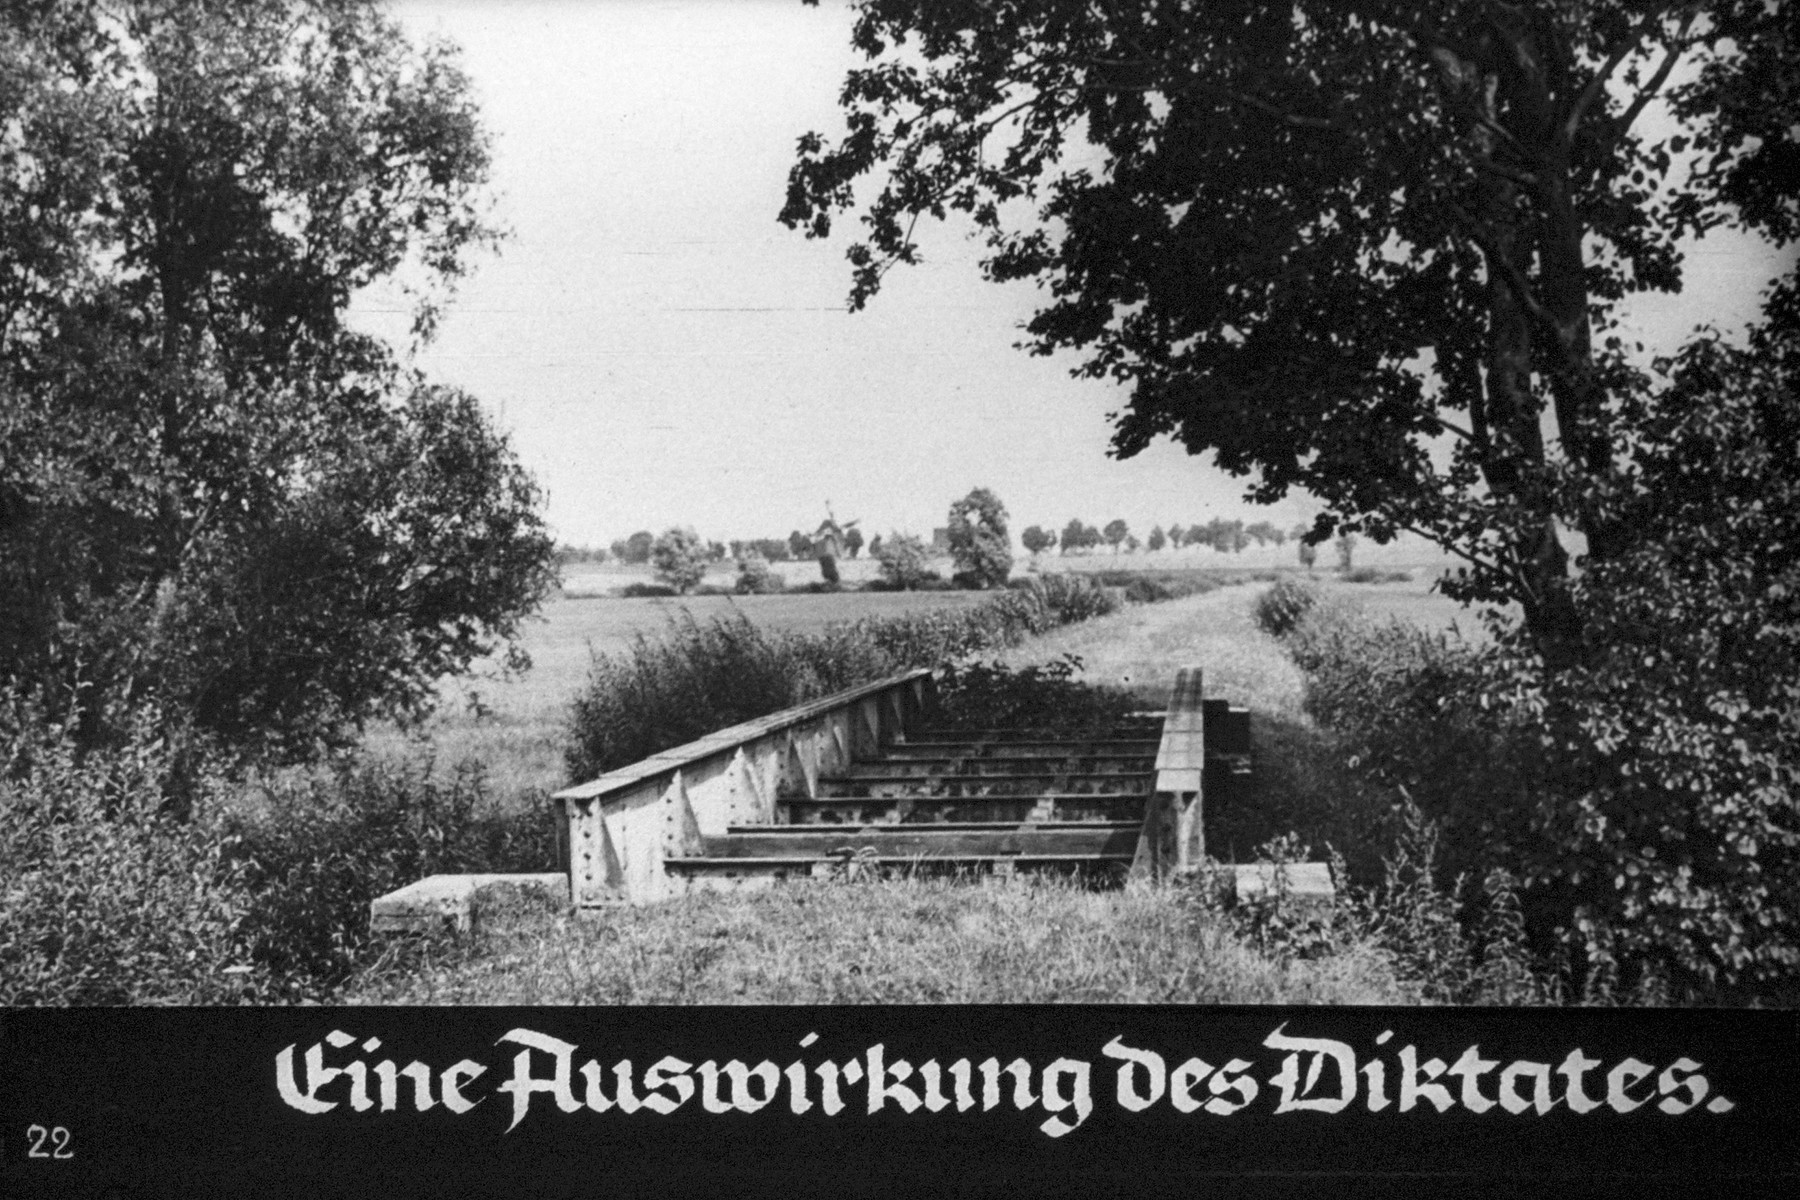 23rd Nazi propaganda slide from Hitler Youth educational material titled "Border Land Upper Silesia."

Eine Auswirkung des Diktates.
//
One effect of the edict.